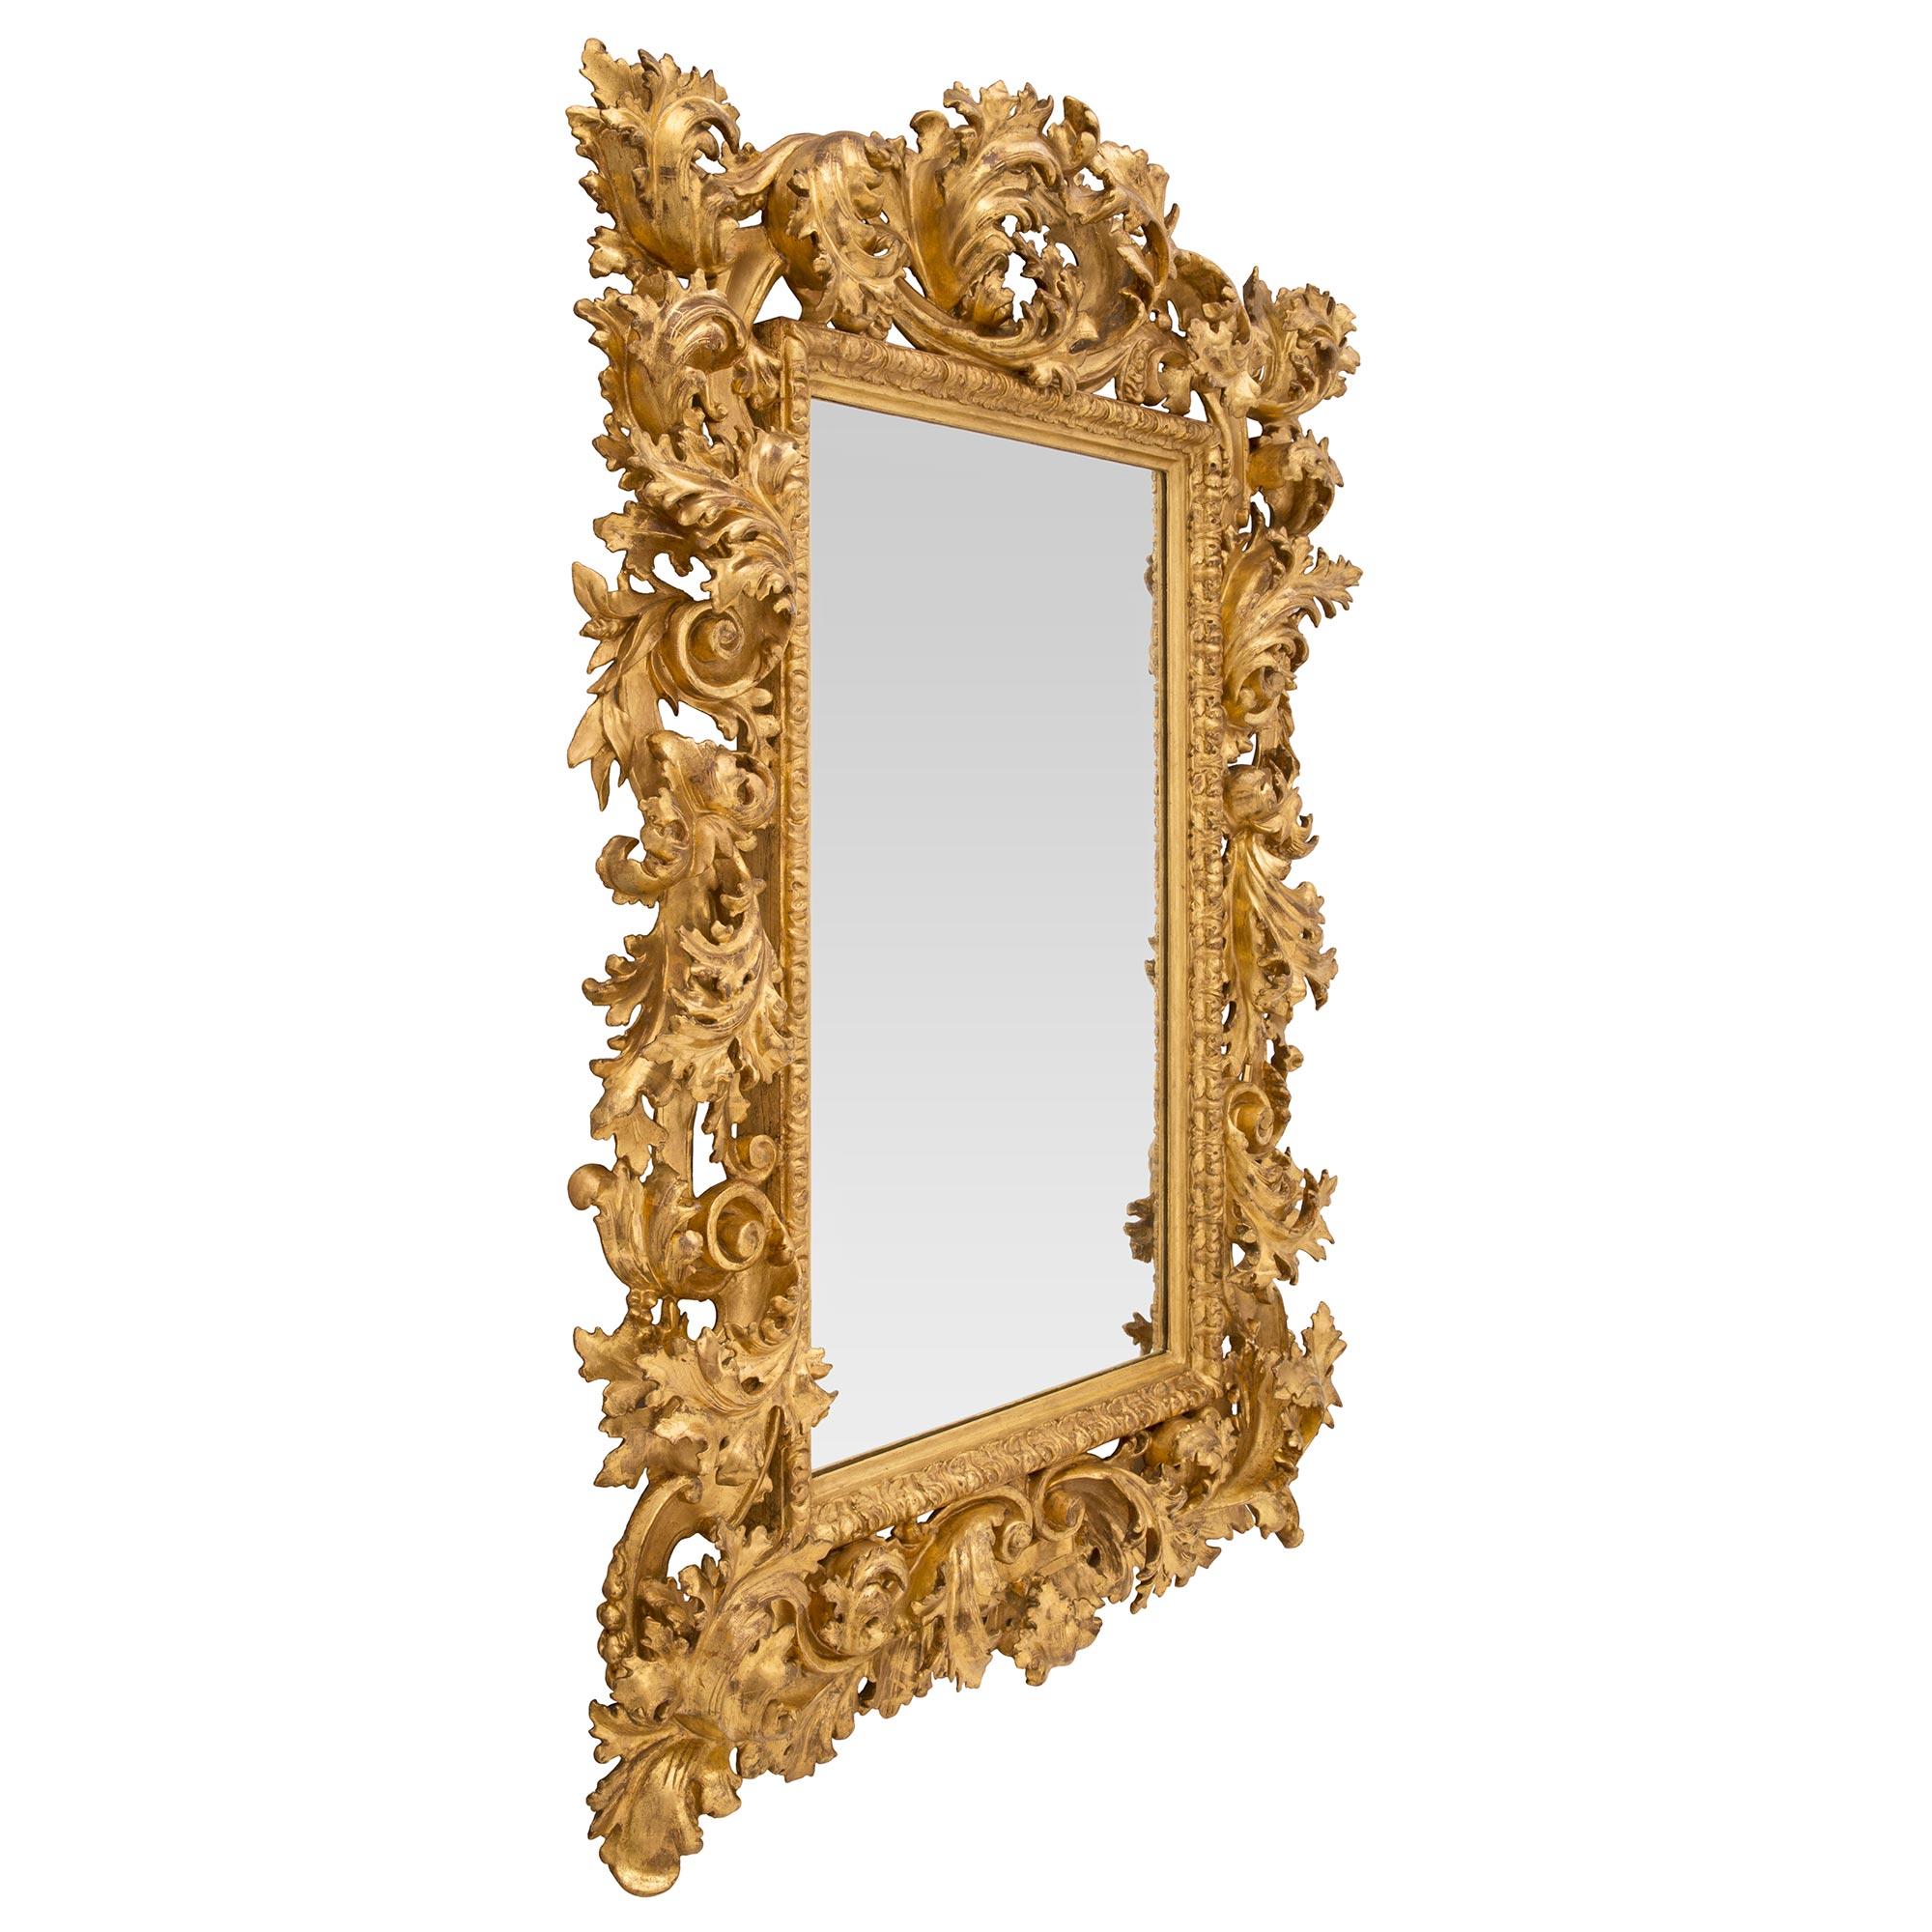 An impressive Italian 19th century Baroque st. giltwood mirror. The mirror is framed within a fine straight mottled border with a fine foliate wrap around band. The outer solid wood frame displays a stunning array of large richly carved leaves